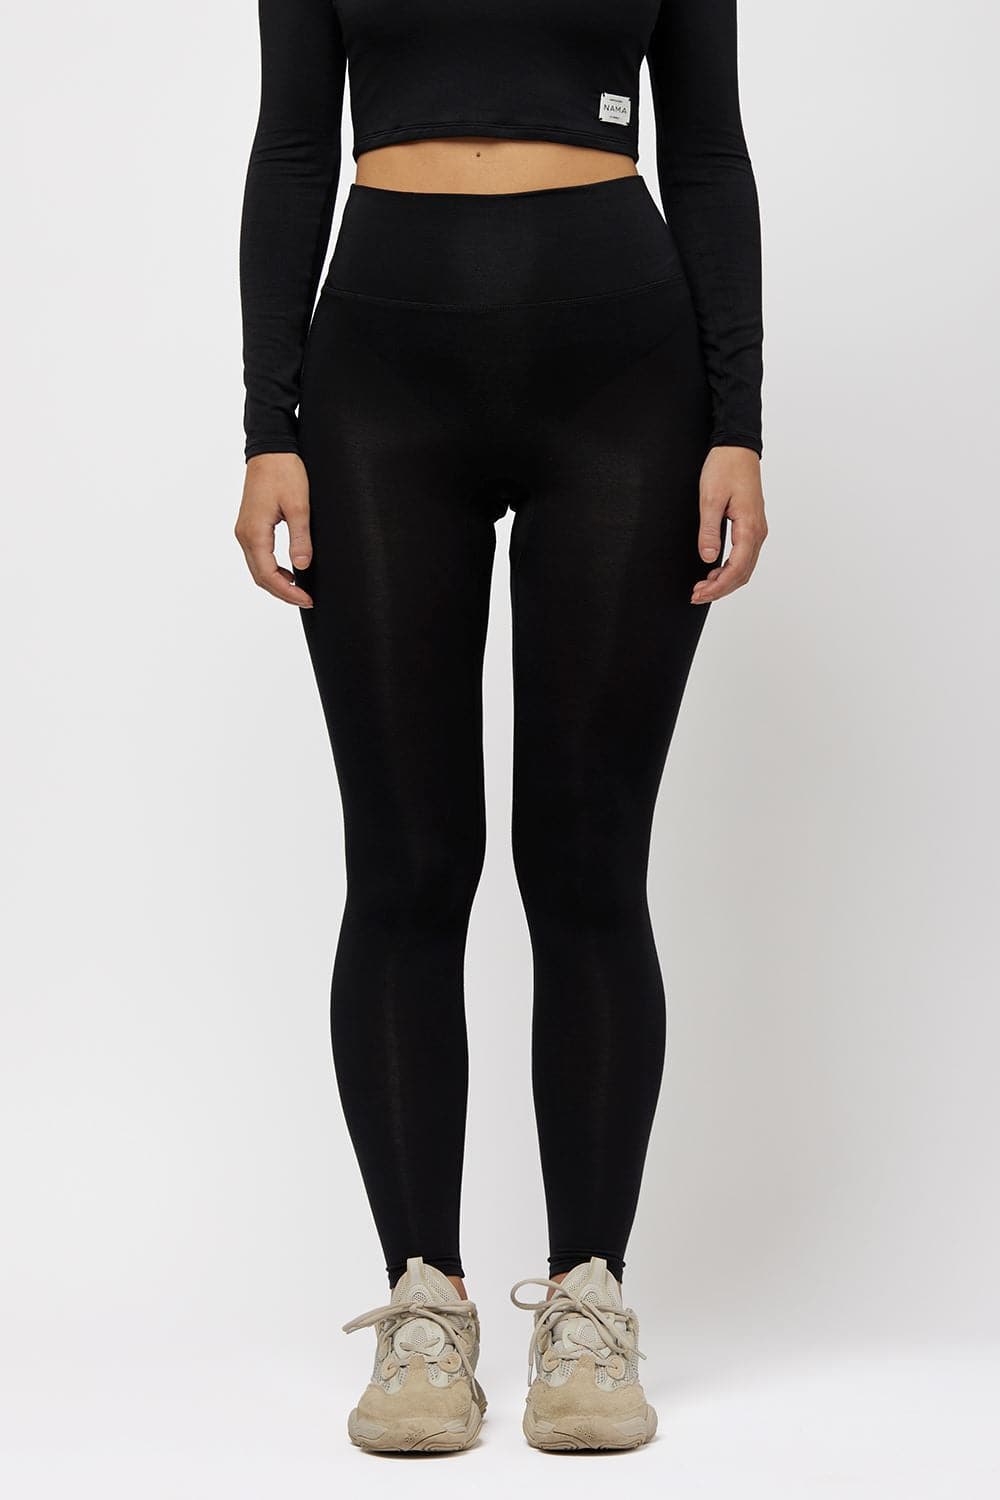 Capri Leggings in Bamboo/cotton/spandex Jersey With 4 Way Stretch